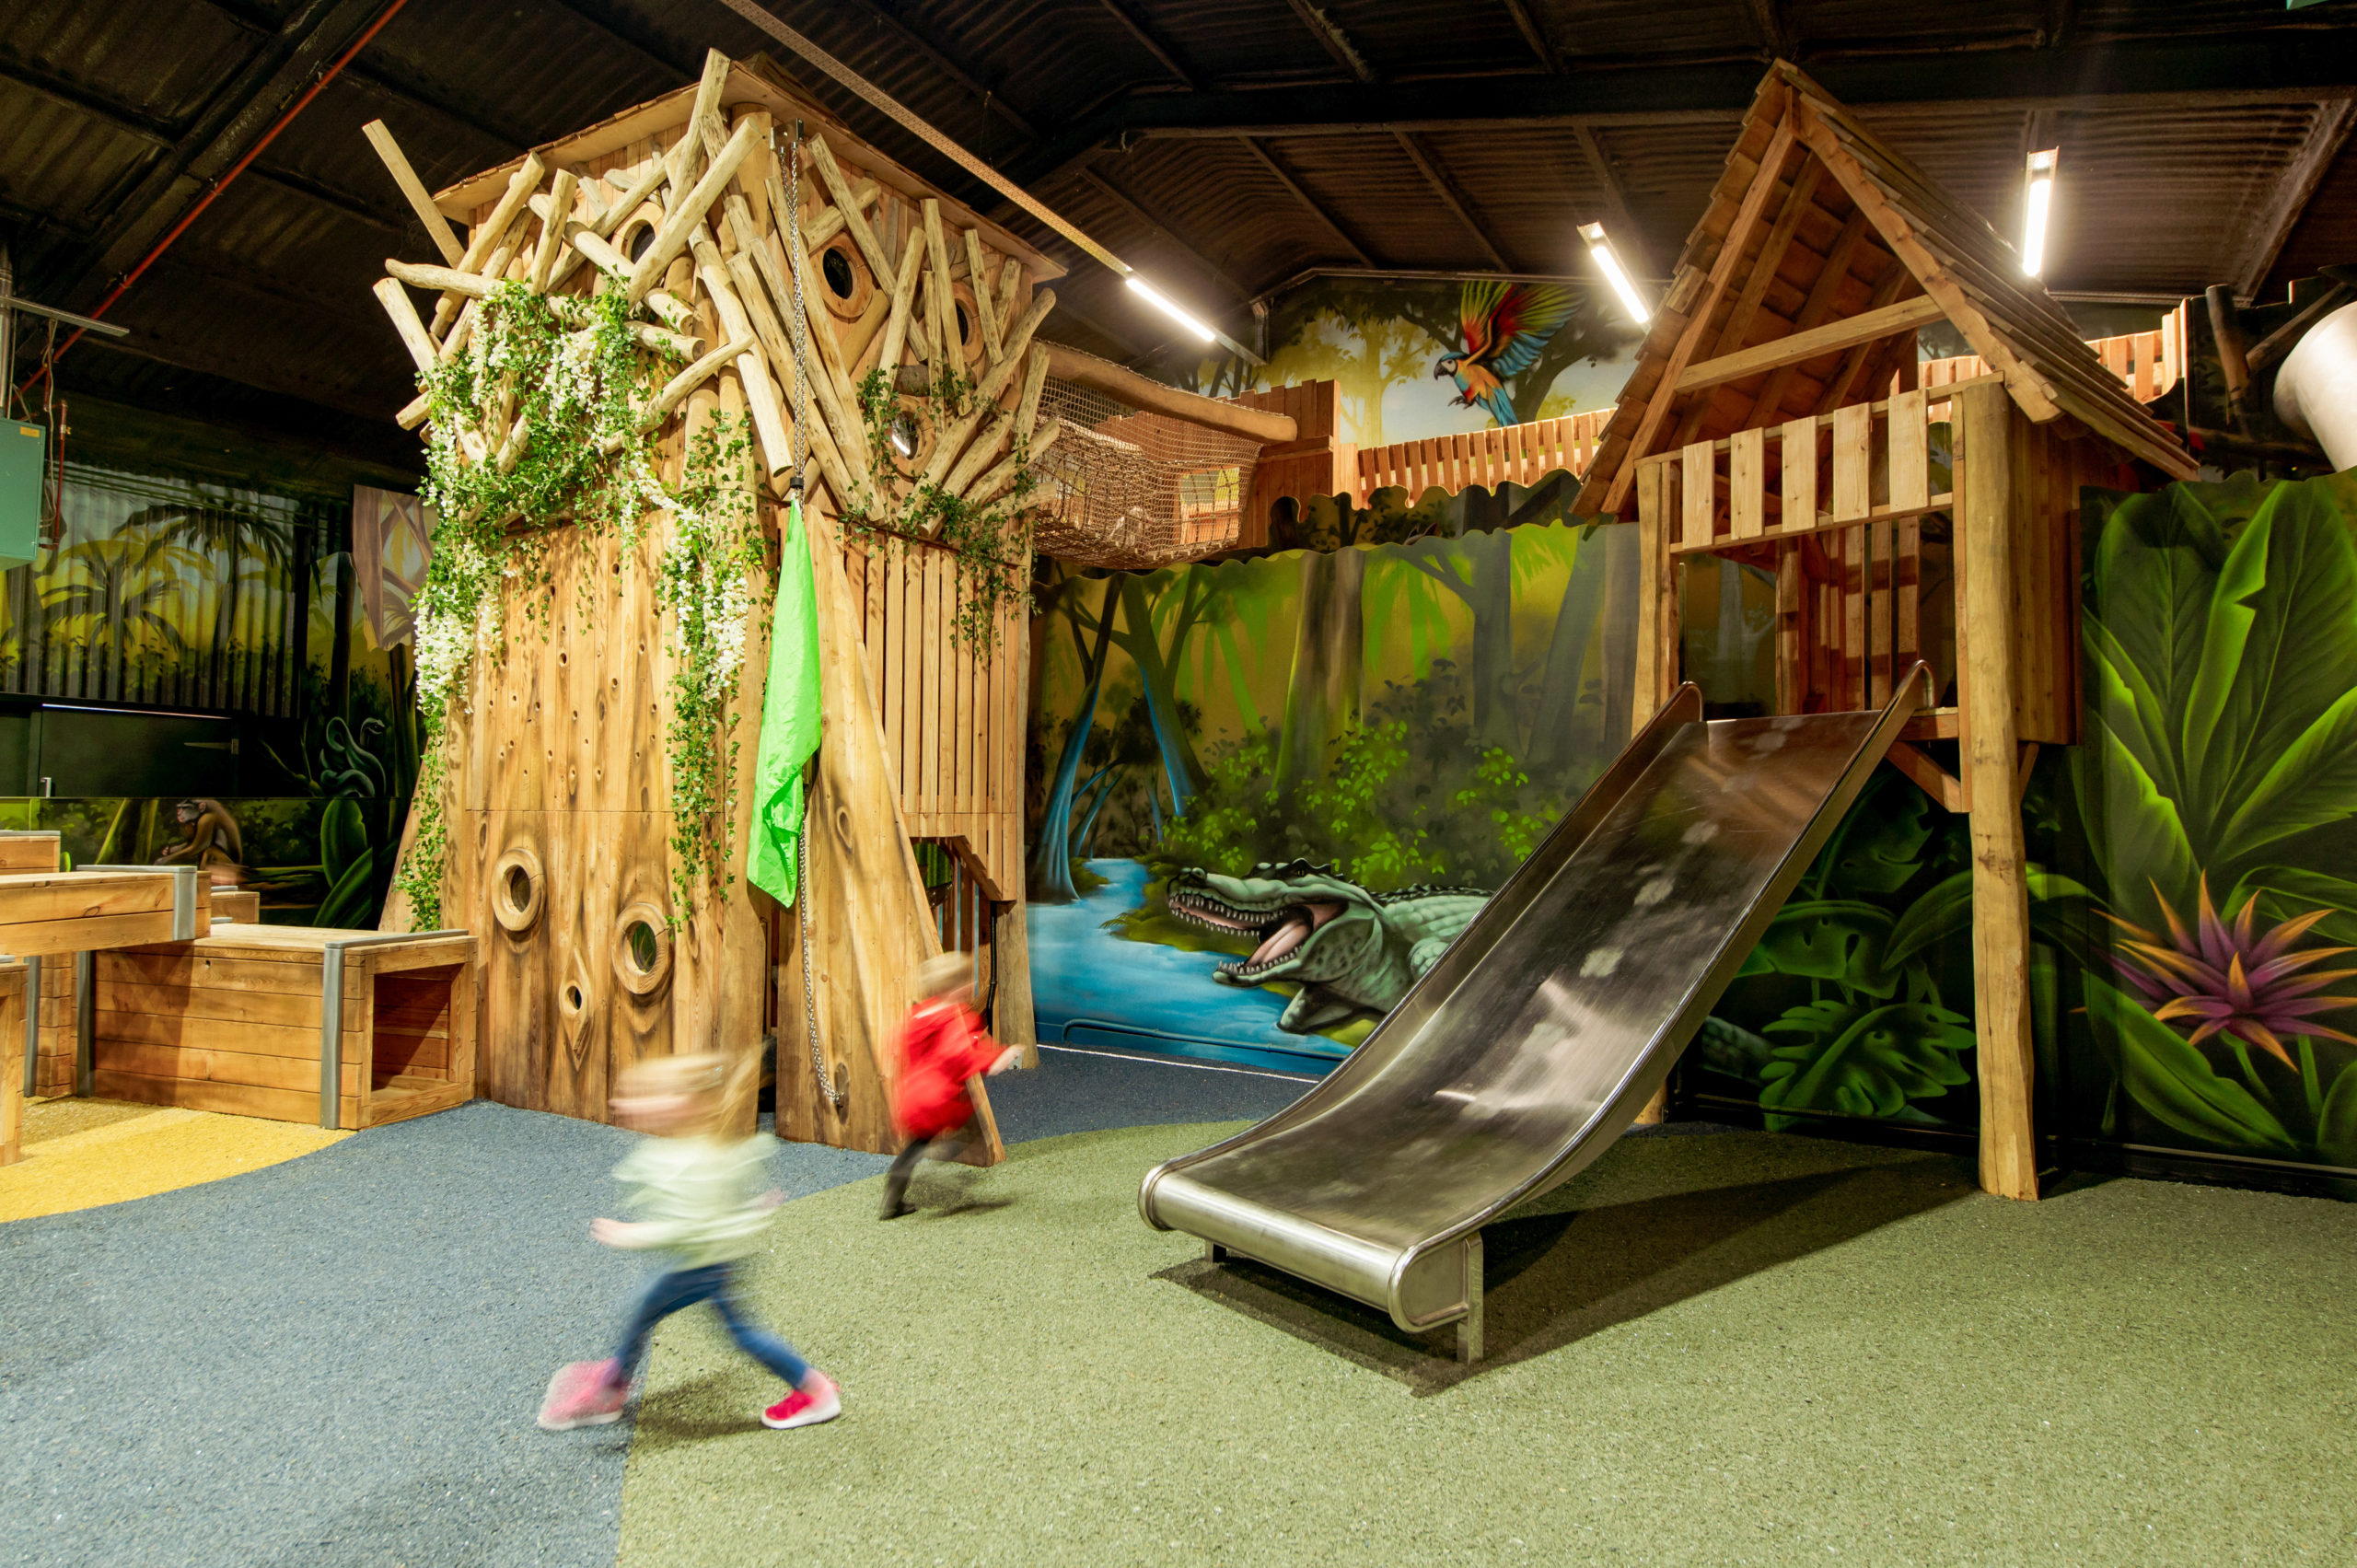 A vibrant and creatively designed indoor jungle-themed playground with children in motion.